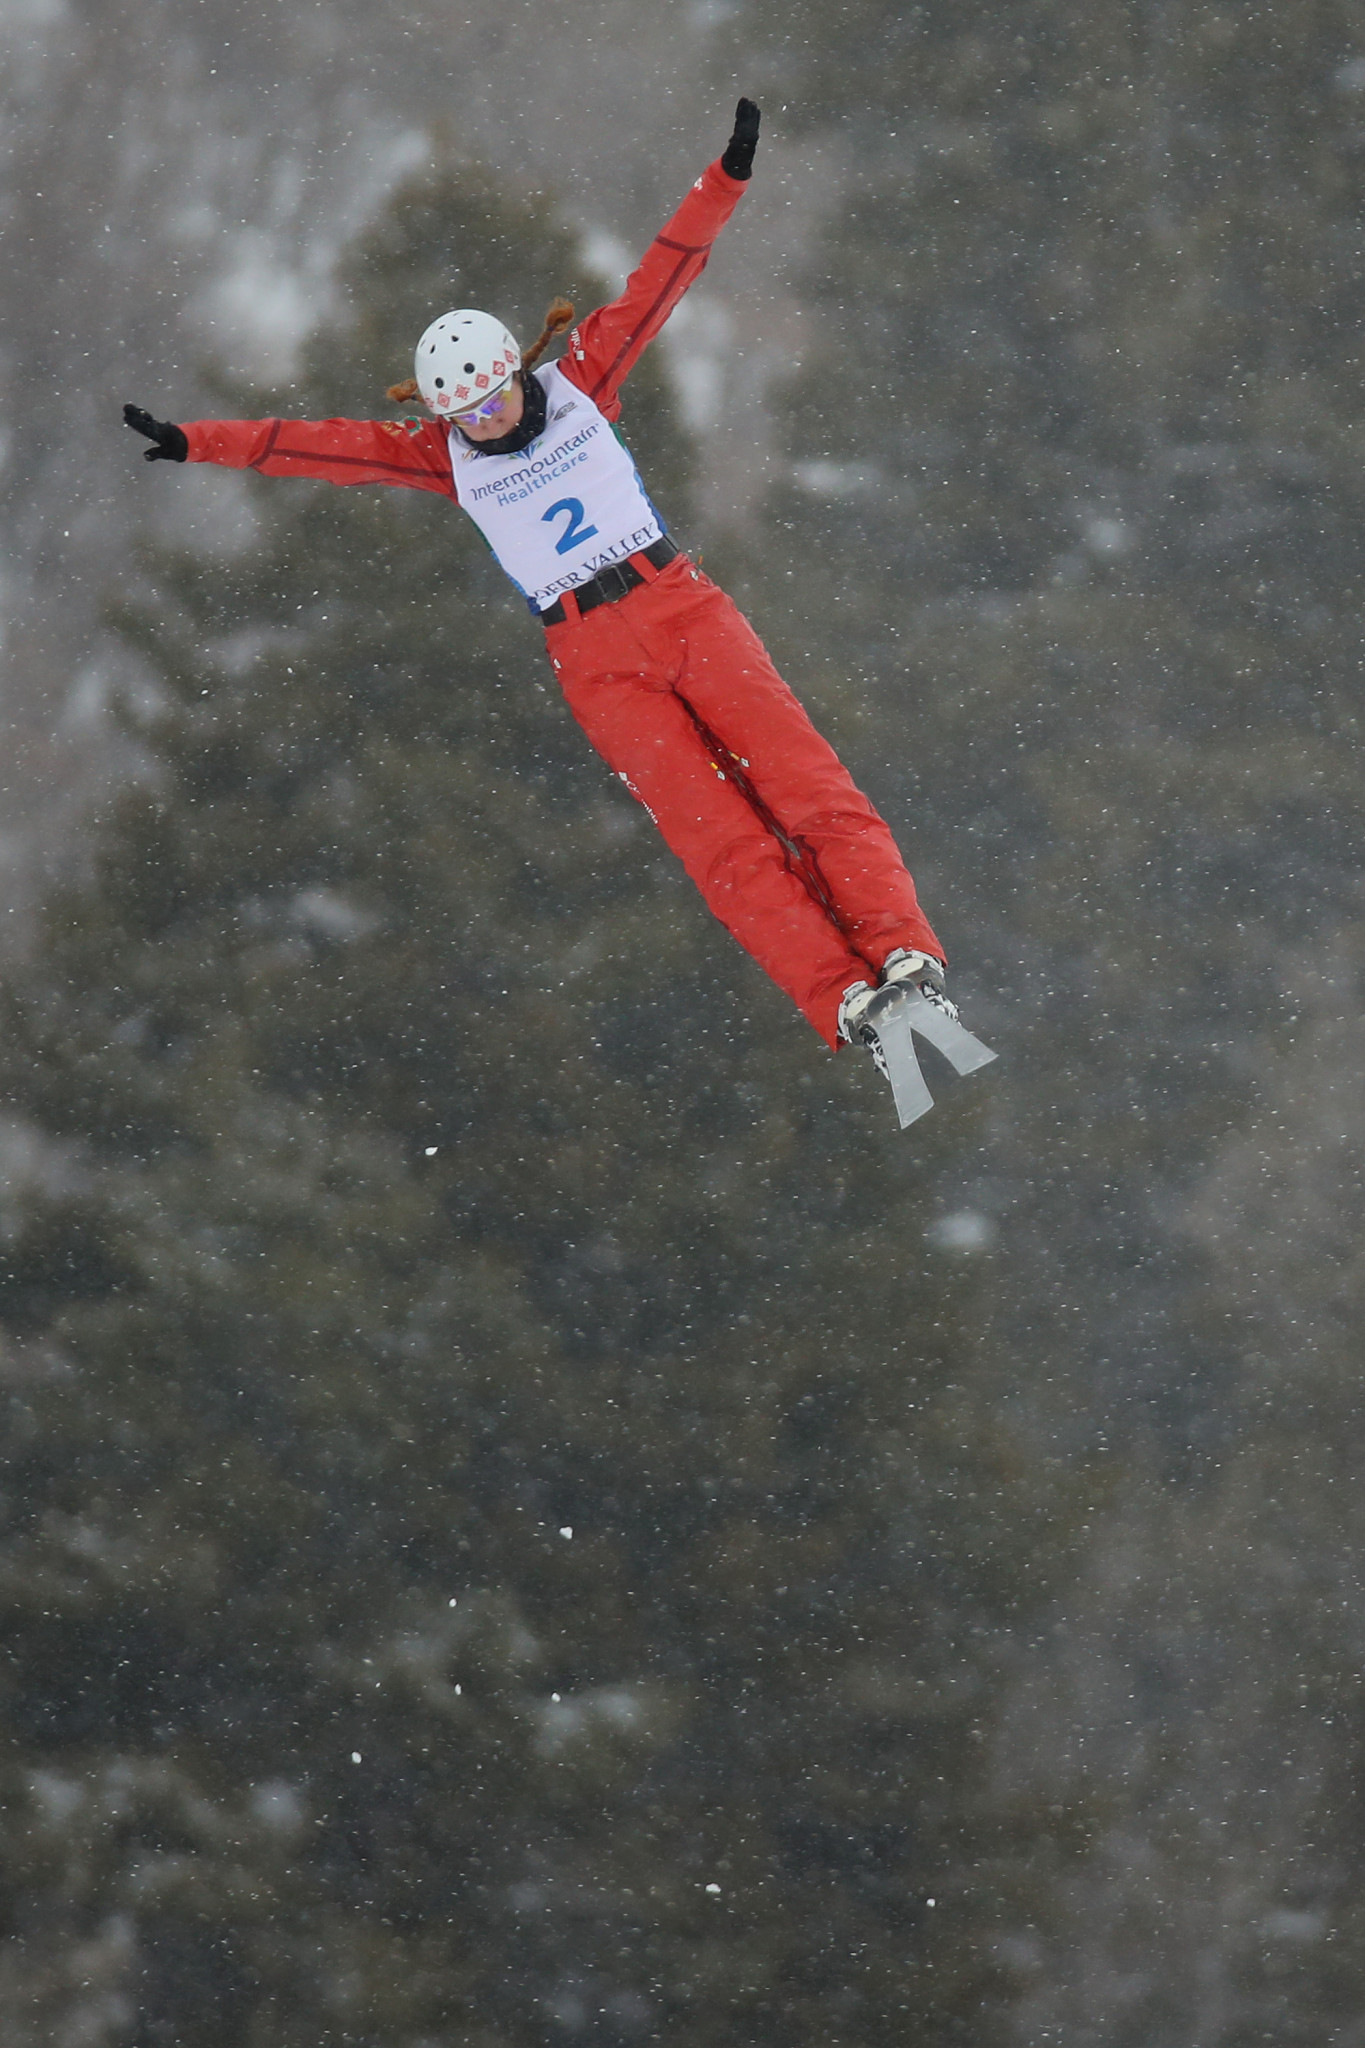 Belarus look to win on home soil at FIS Aerials World Cup